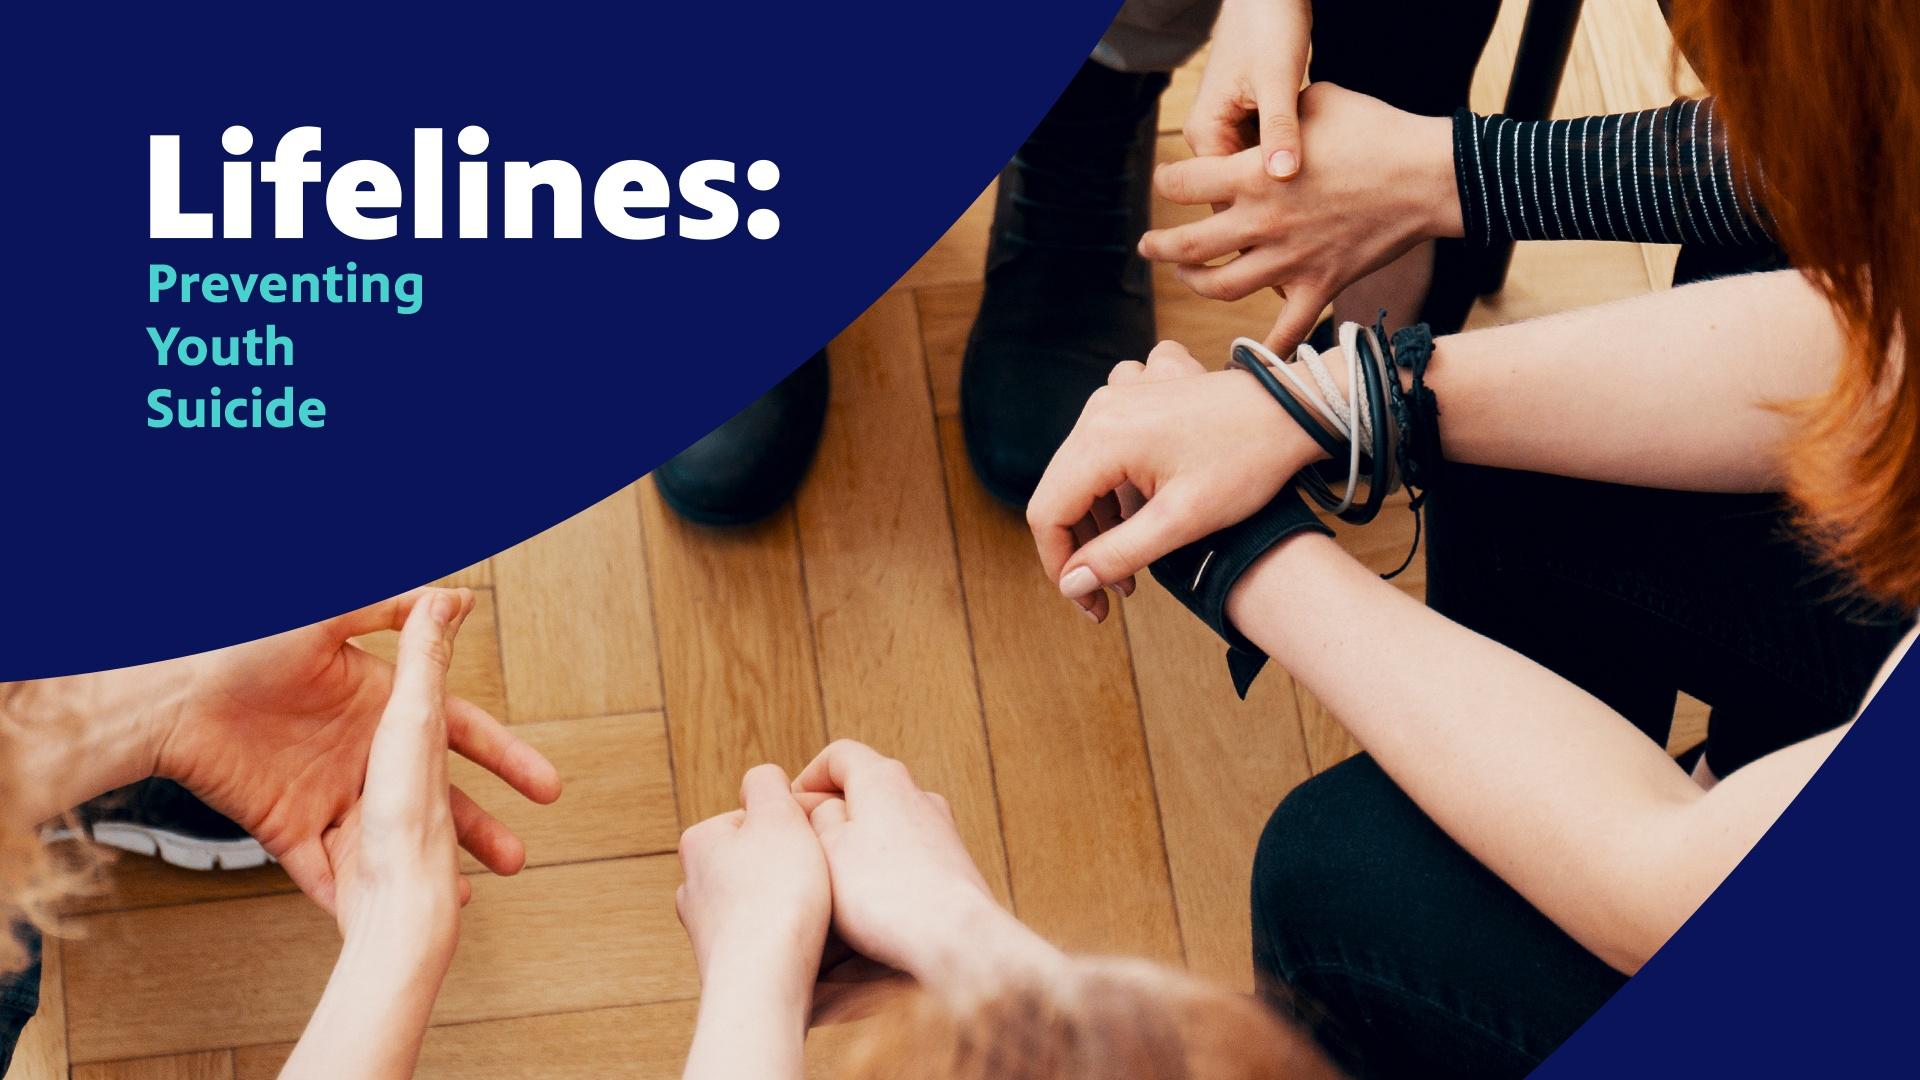 Lifelines: Preventing Youth Suicide